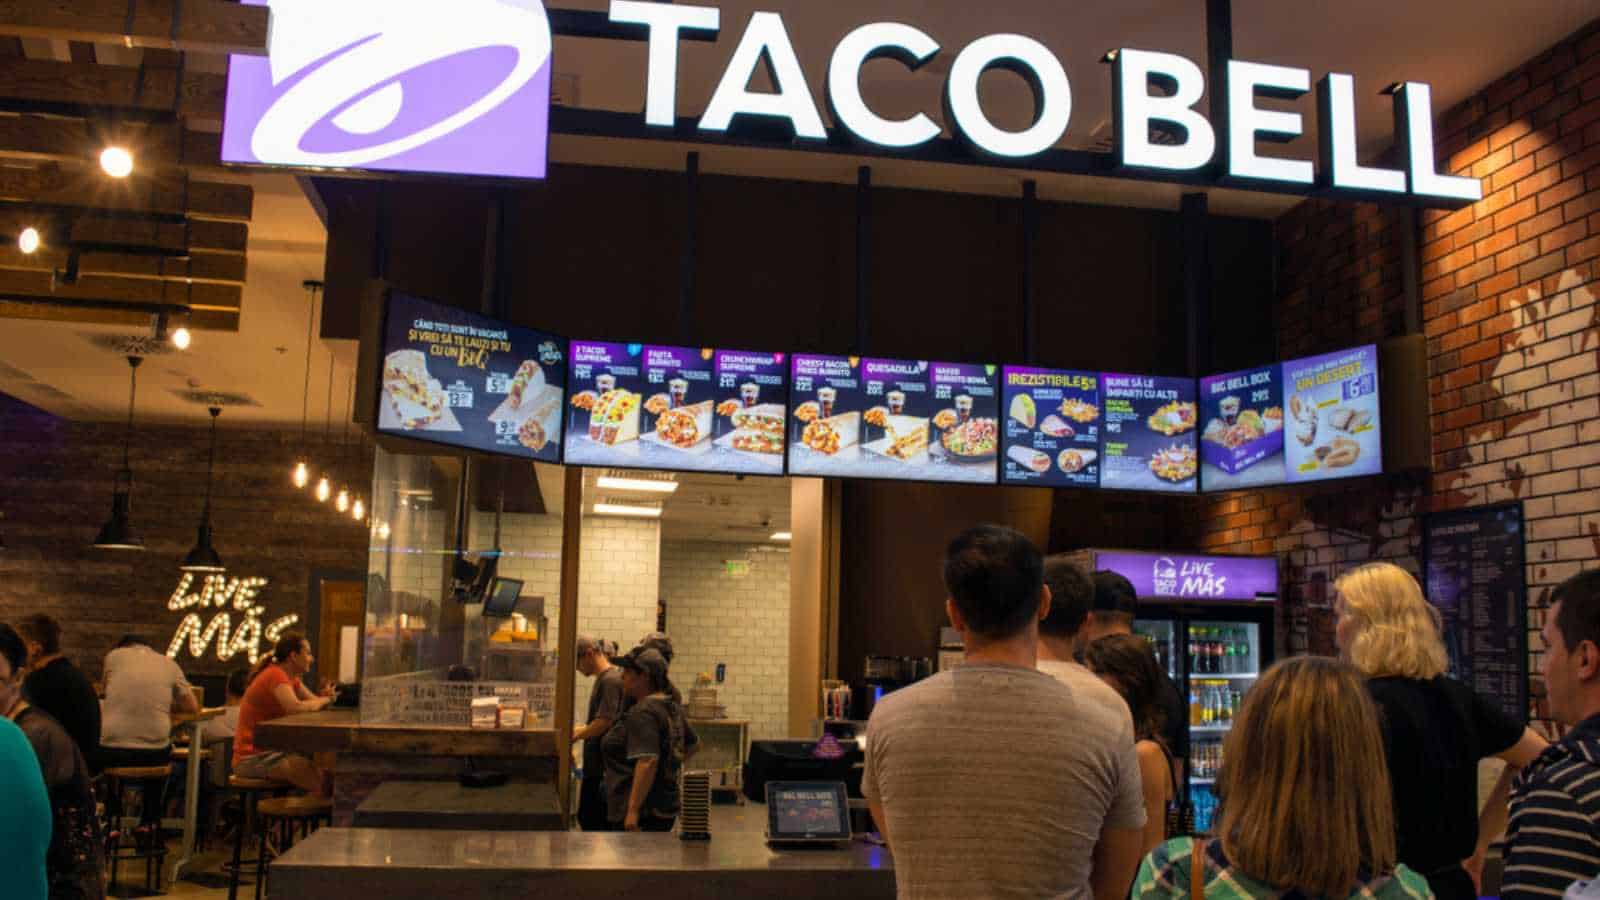 08 July 2018-Bucharest, Romania. The interior of the Taco Bell restaurant inside the public mall, Baneasa
